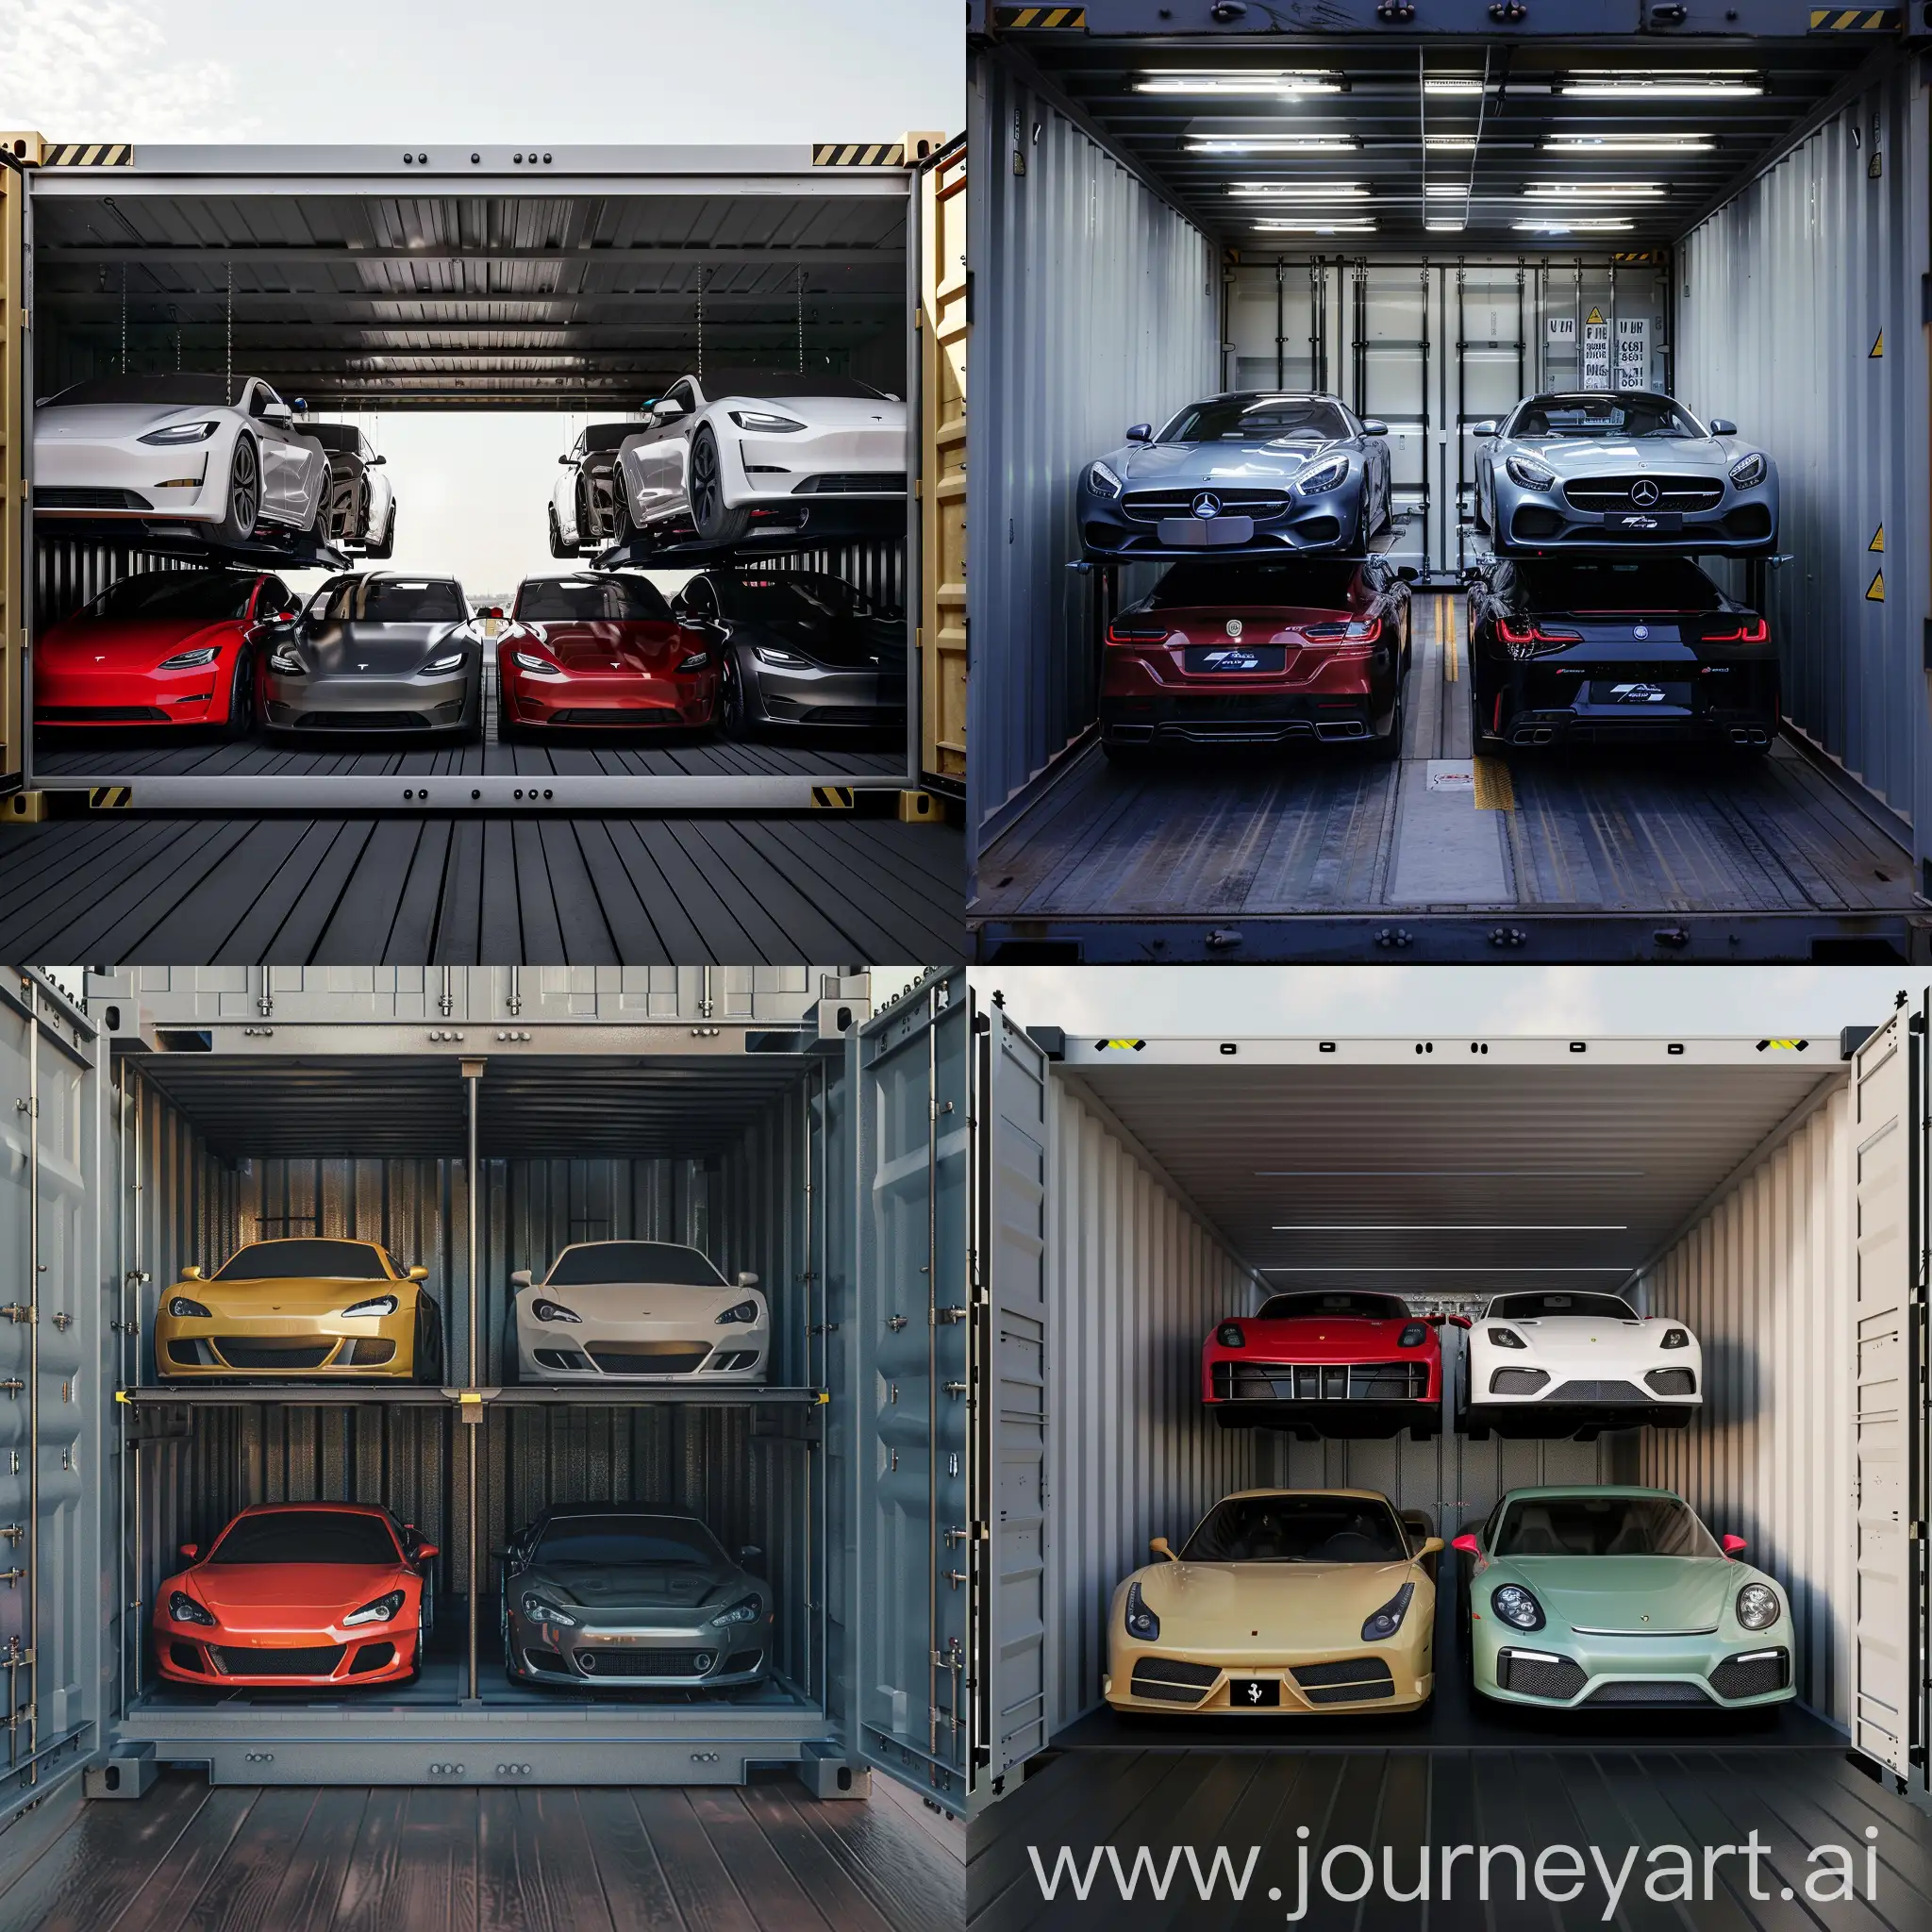 4 cars loaded in the container